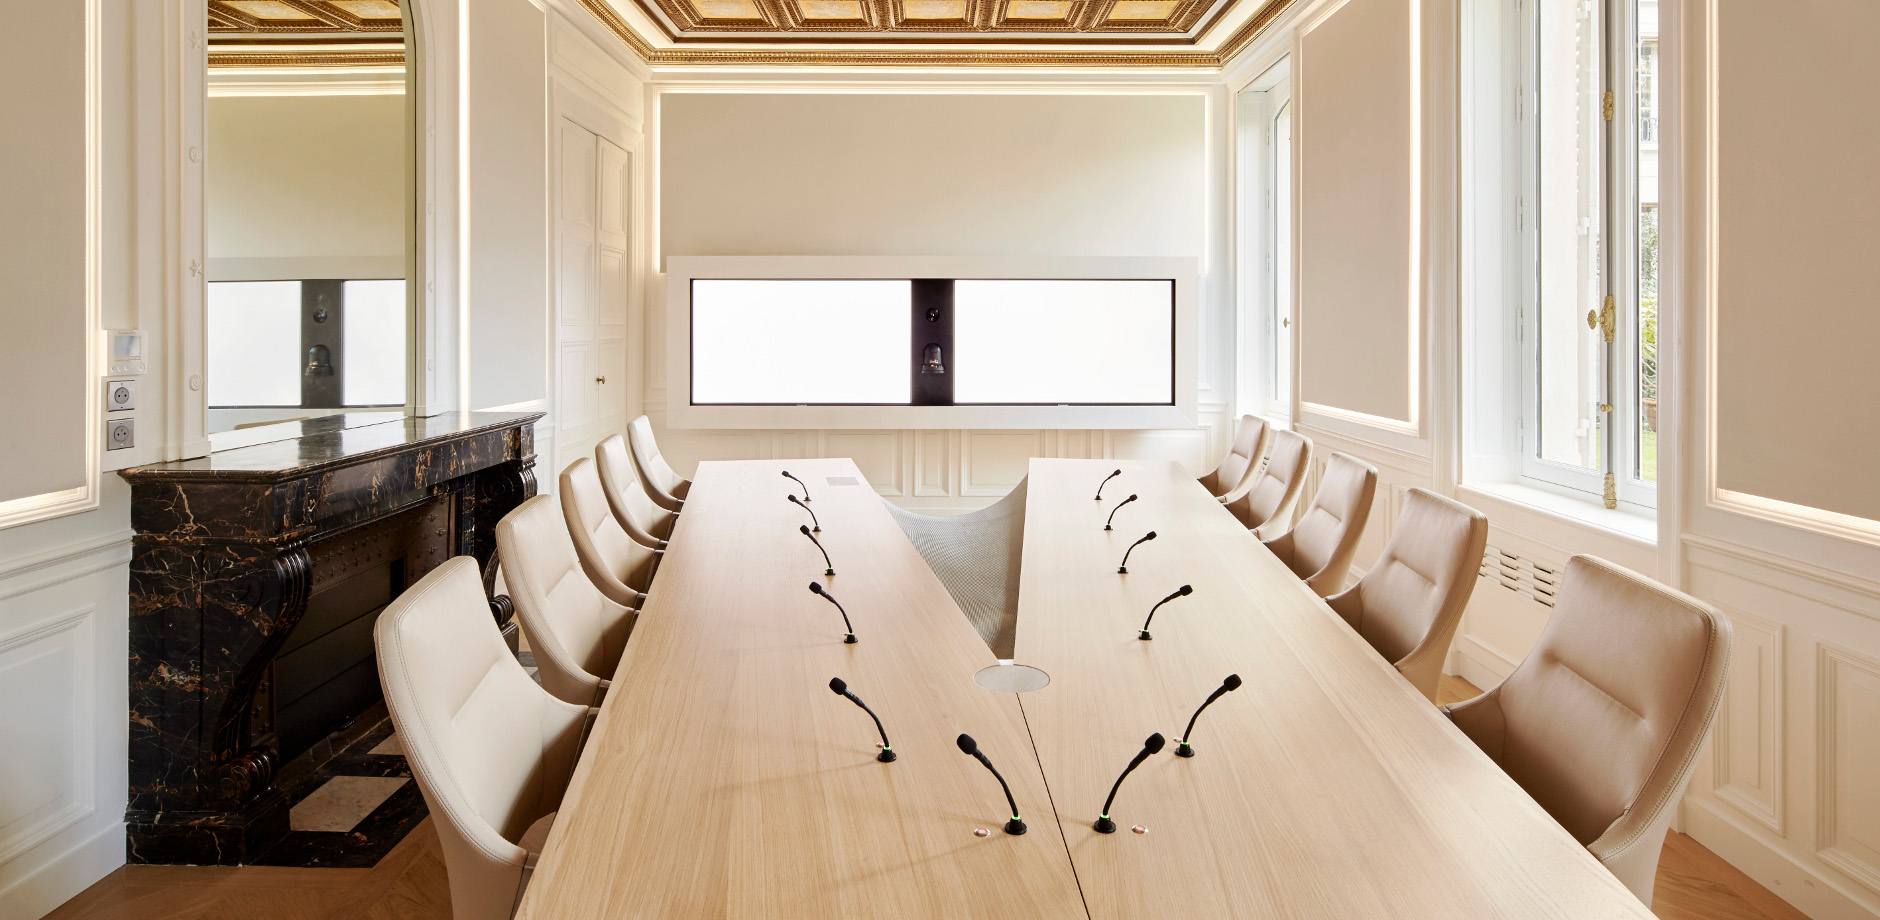 Conference room reference - Wendel Investissement - Graph Conference Chair